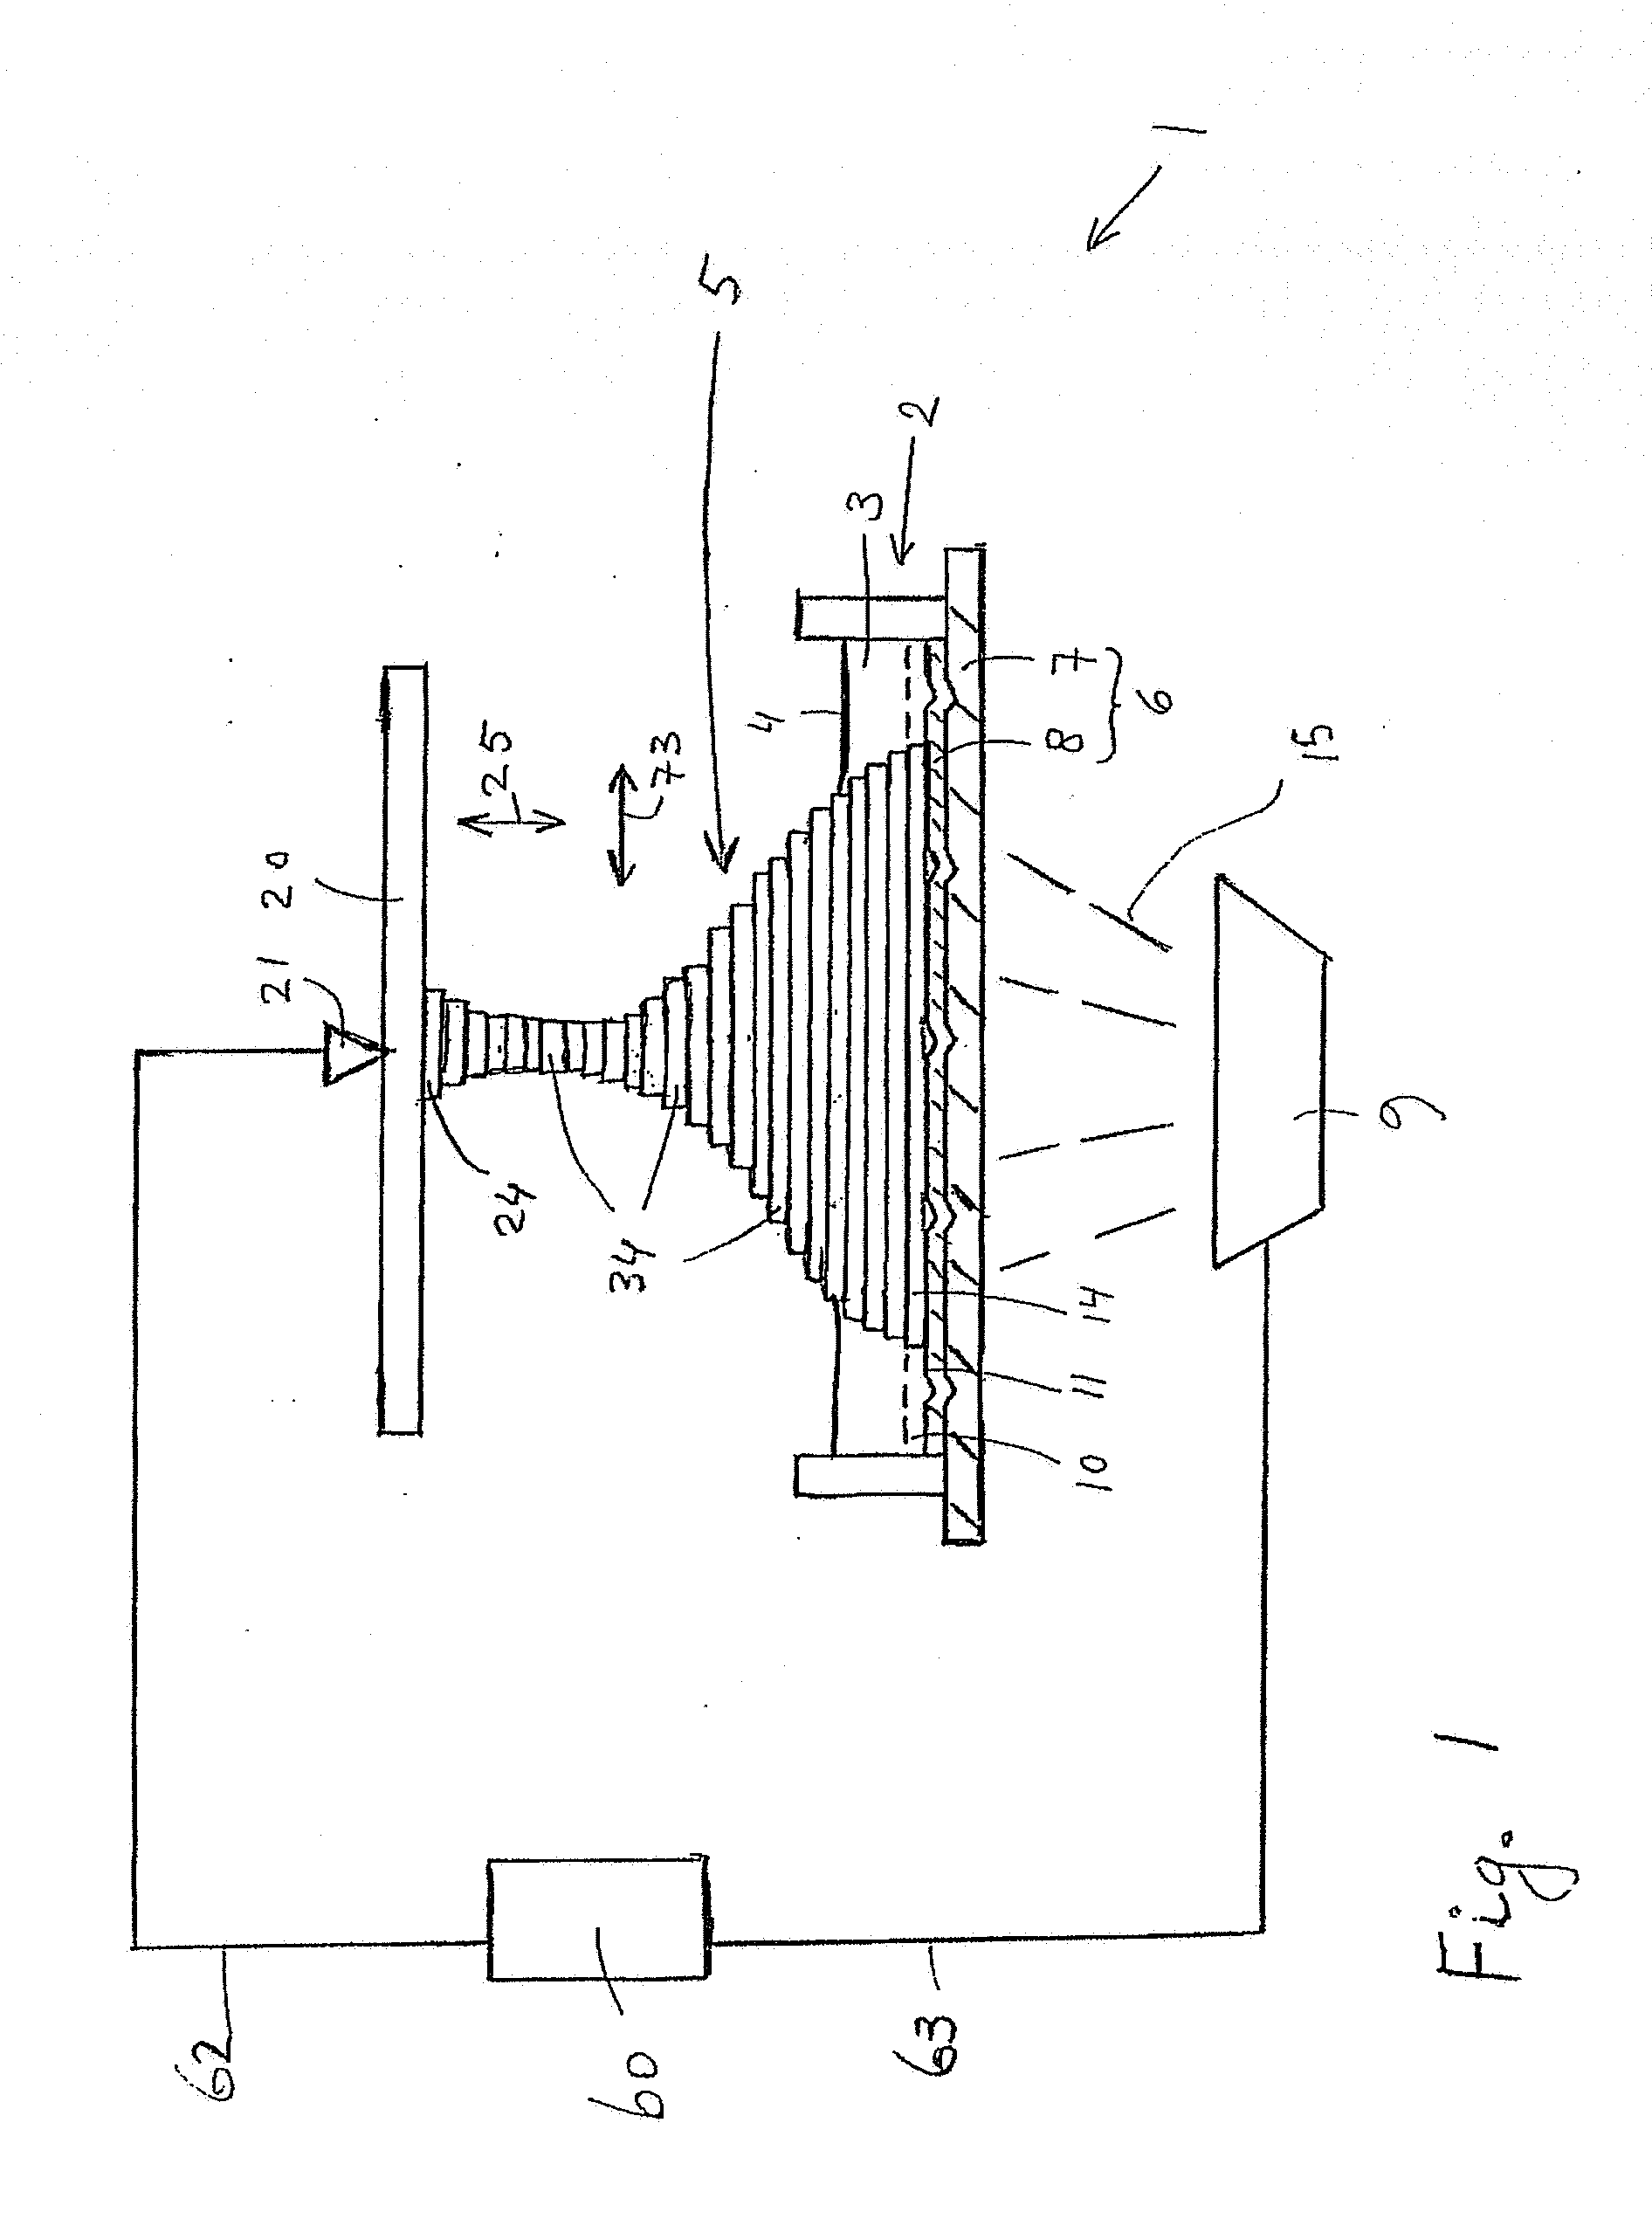 Method and system for layerwise production of a tangible object